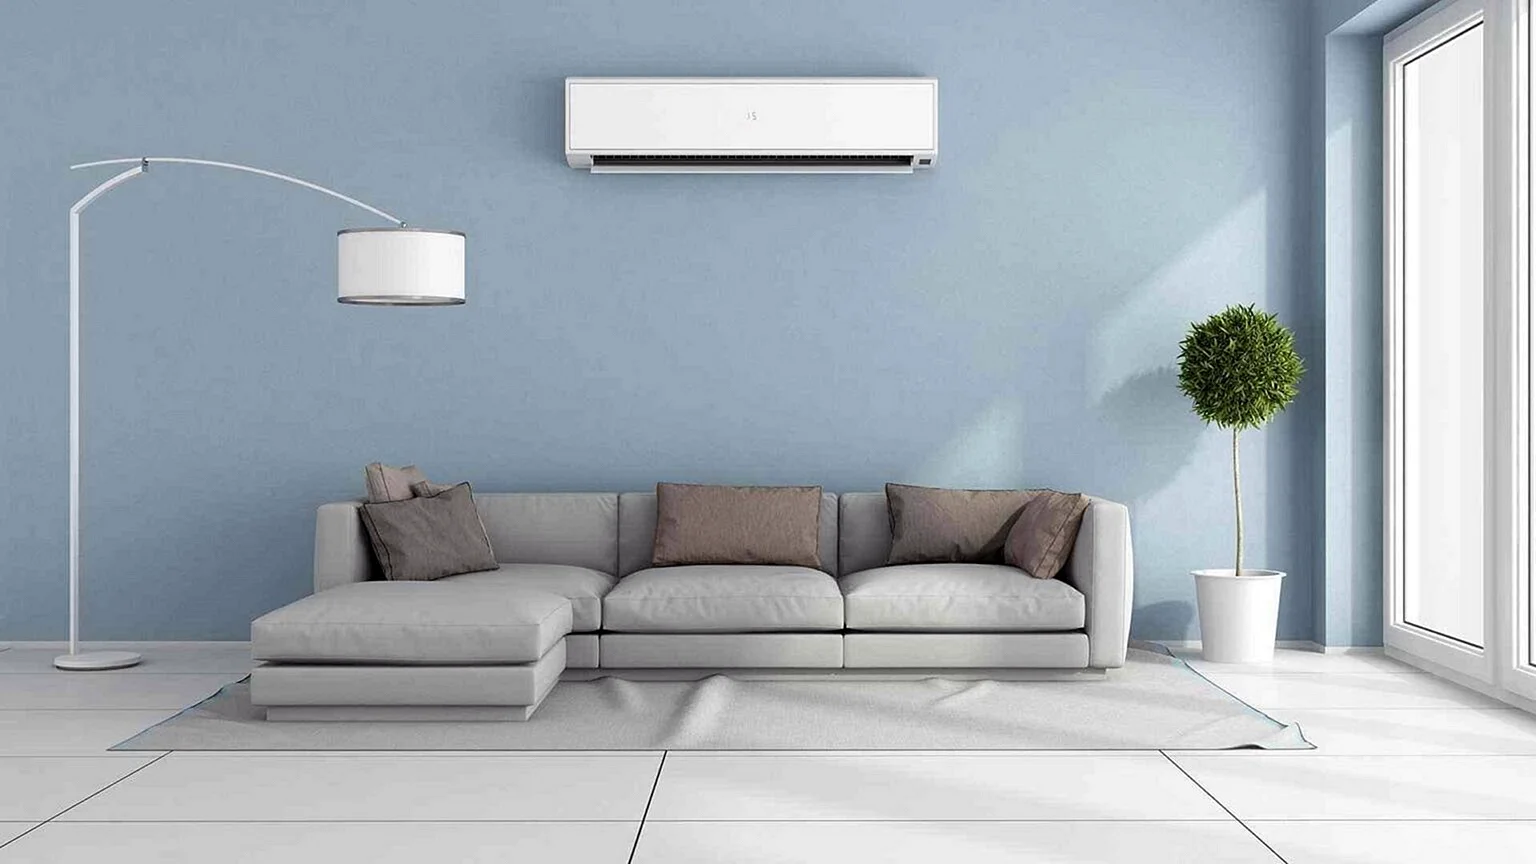 Air Conditioner In Wall Wallpaper